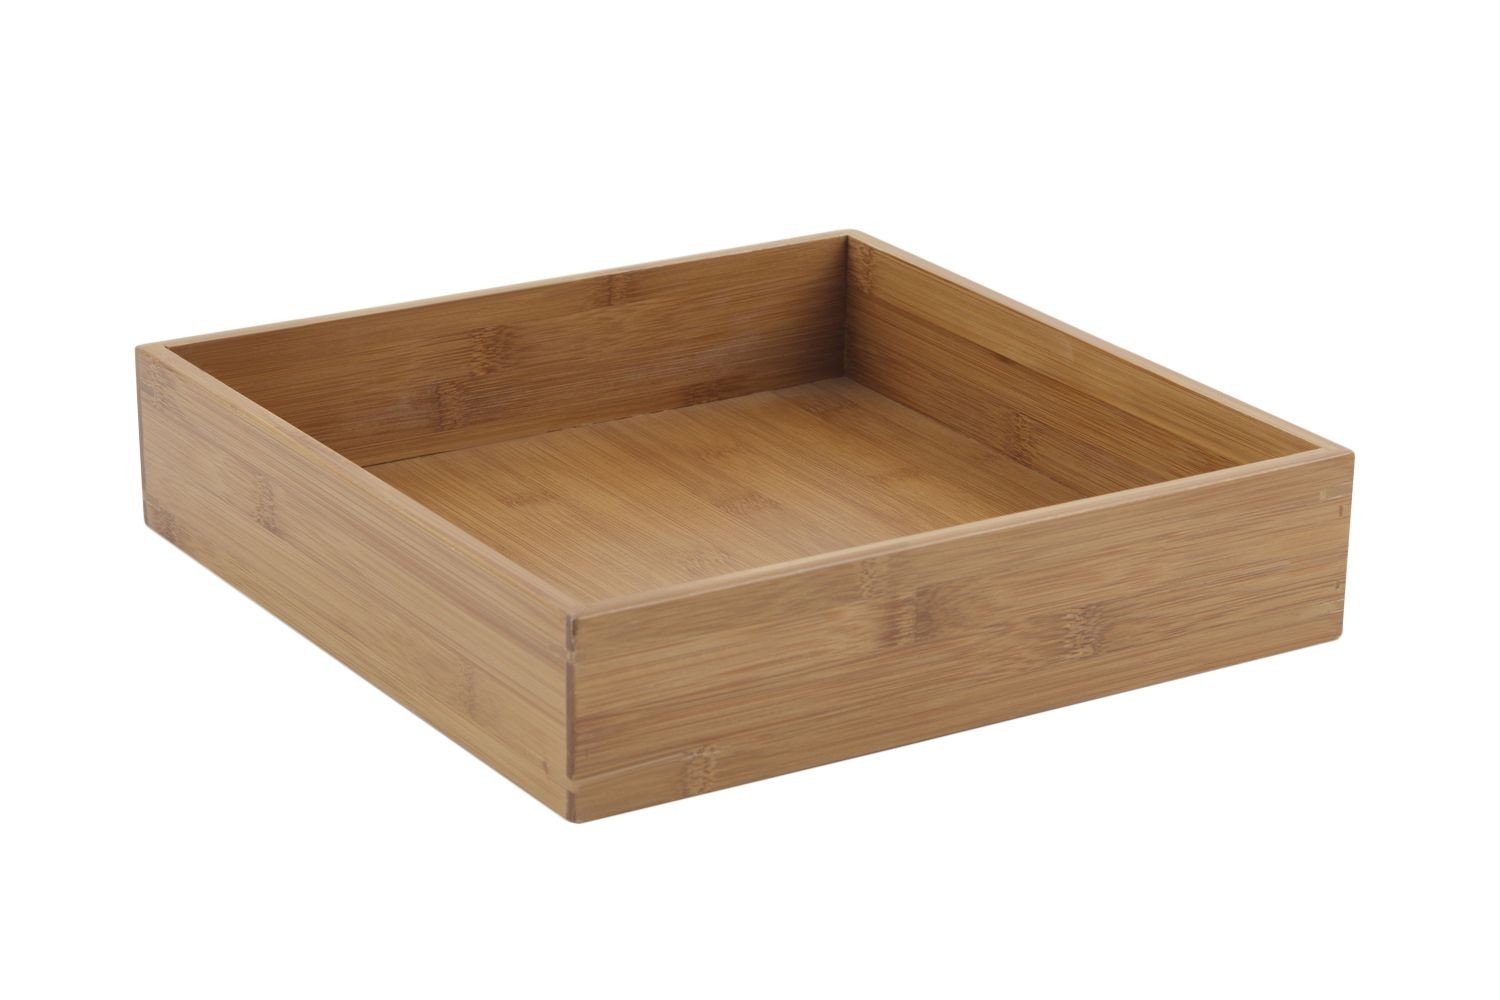 Bon Chef 9326 Half Size Bamboo Holder for Cold Wave Platter 11 1/4" x 11 1/4" x 2 5/8", Set of 6